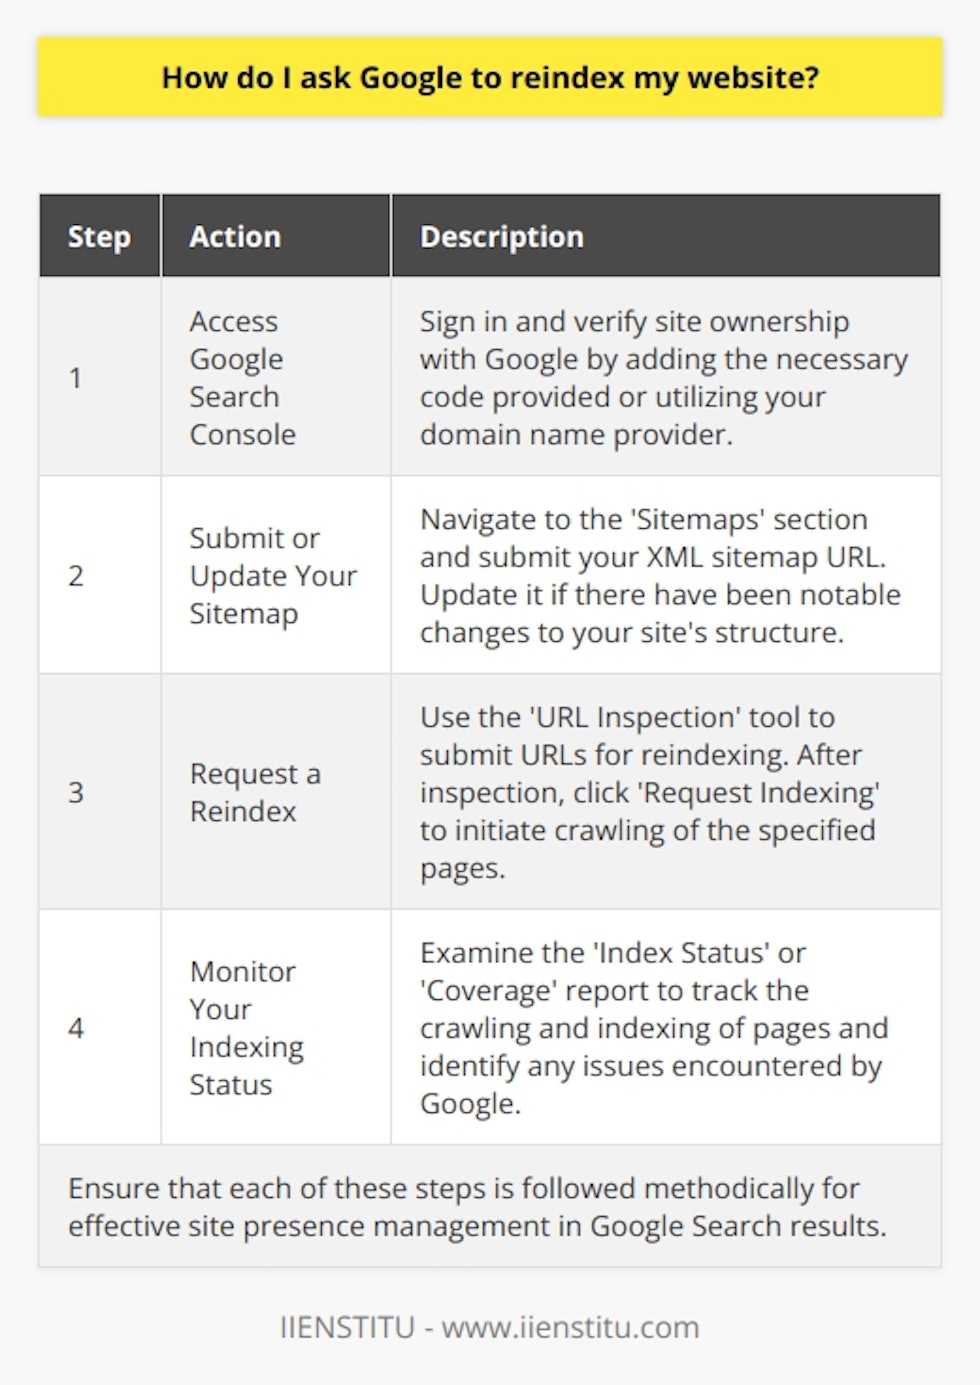 Requesting a website reindex from Google is an important process for ensuring your website's content is up to date in Google search results. Here's how to go about it using Google Search Console, which is the go-to platform for managing your site's presence in Google's search results.**Step 1: Access Google Search Console**First, ensure you have access to Google Search Console. If you haven’t already set up your website on this platform, sign in with your Google account, add your site, and verify ownership as directed by Google's guidelines. Verification may involve adding a code to your website or using your domain name provider.**Step 2: Submit or Update Your Sitemap**A sitemap is an XML file that lists the URLs for a site. It allows Google to understand the structure of your site, which aids its bots in crawling effectively. Navigate to the 'Sitemaps' section in Google Search Console and submit your sitemap URL if you haven't already. If your site undergoes significant changes, like new pages or changes in structure, update your sitemap accordingly. **Step 3: Request a Reindex**Once your sitemap is in place, go to the 'URL Inspection' tool in Google Search Console. Here, you can submit individual URLs for reindexing. Enter the full URL of the page or pages you need Google to crawl again. After the URL inspection, click on 'Request Indexing'. This prompts Google's bots to revisit the submitted URL and update its indexing.**Step 4: Monitor Your Indexing Status**After you've requested indexing, it's important to keep an eye on your site's indexing progress. The 'Index Status' report, or the newly updated 'Coverage' report, allows you to check if Google has successfully crawled and indexed your pages. This can help you understand the efficacy of your site's SEO performance and spot any issues Google might have encountered when accessing your site.In summary, managing your website's presence on Google involves using Google Search Console to verify your site, submit and update a sitemap, request a reindex of URLs as needed, and monitor the status of your site's indexing. Following this process earnestly can help ensure that your website's content is being accurately reflected in Google's search results.